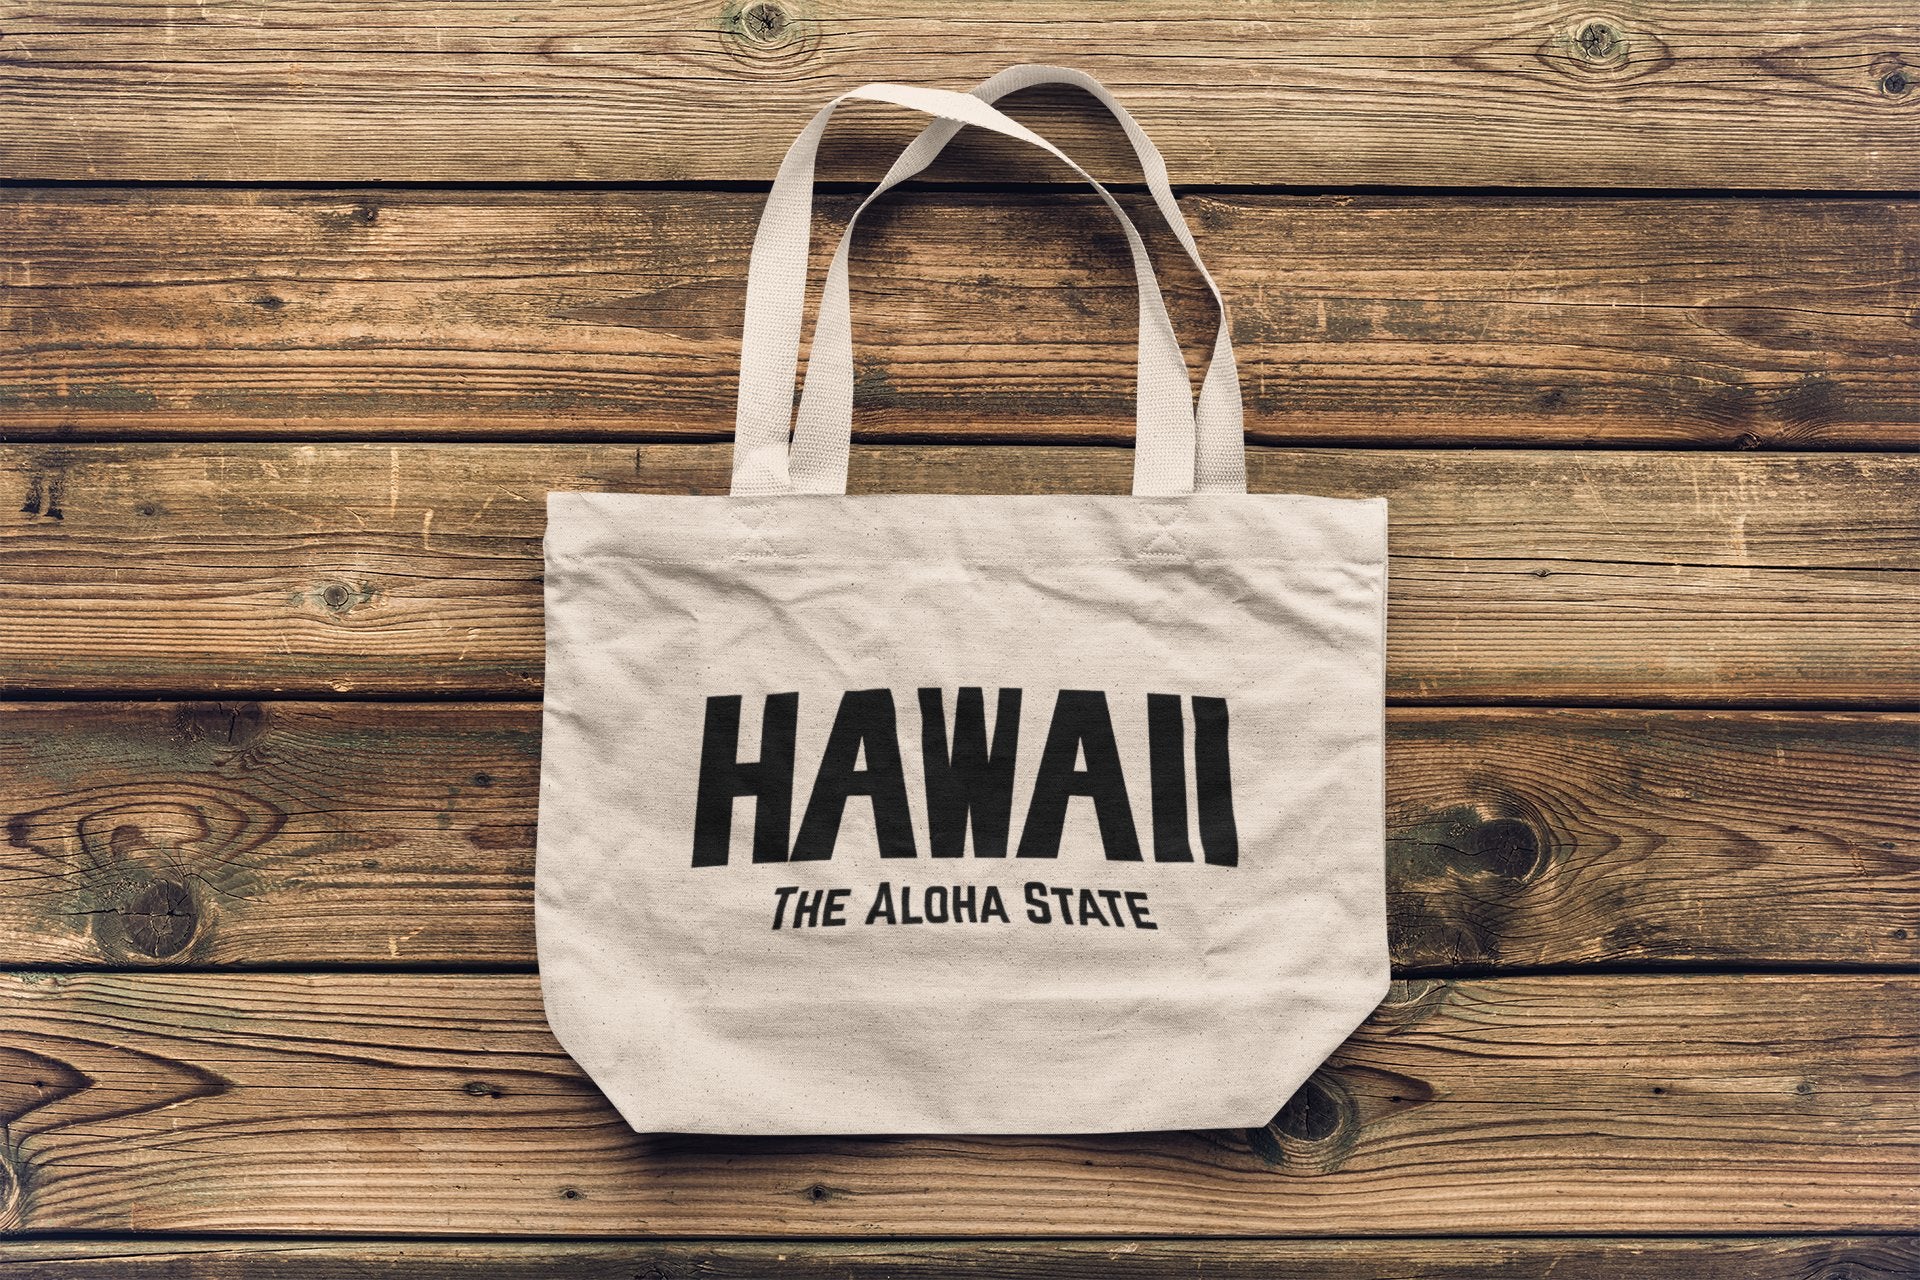 Hawaii - Jumbo Size Vintage Style Retro City Cotton Canvas Tote Bags